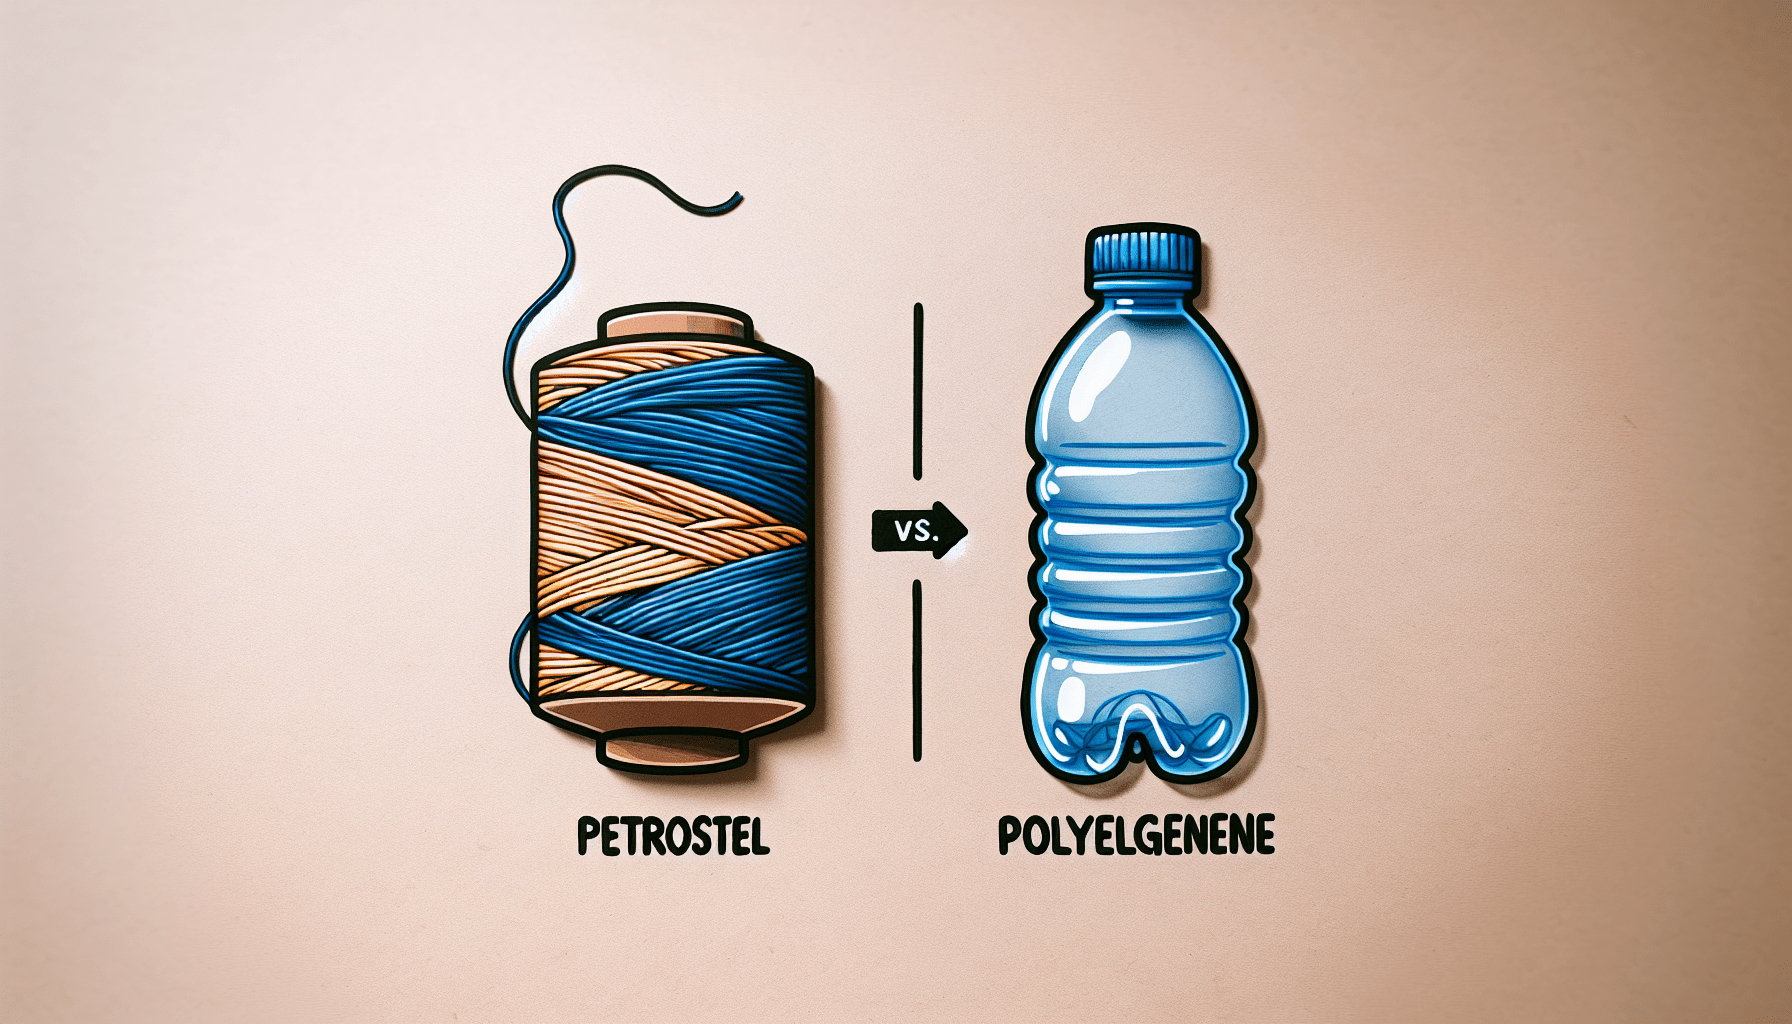 Are Polyester And Polyethylene The Same?